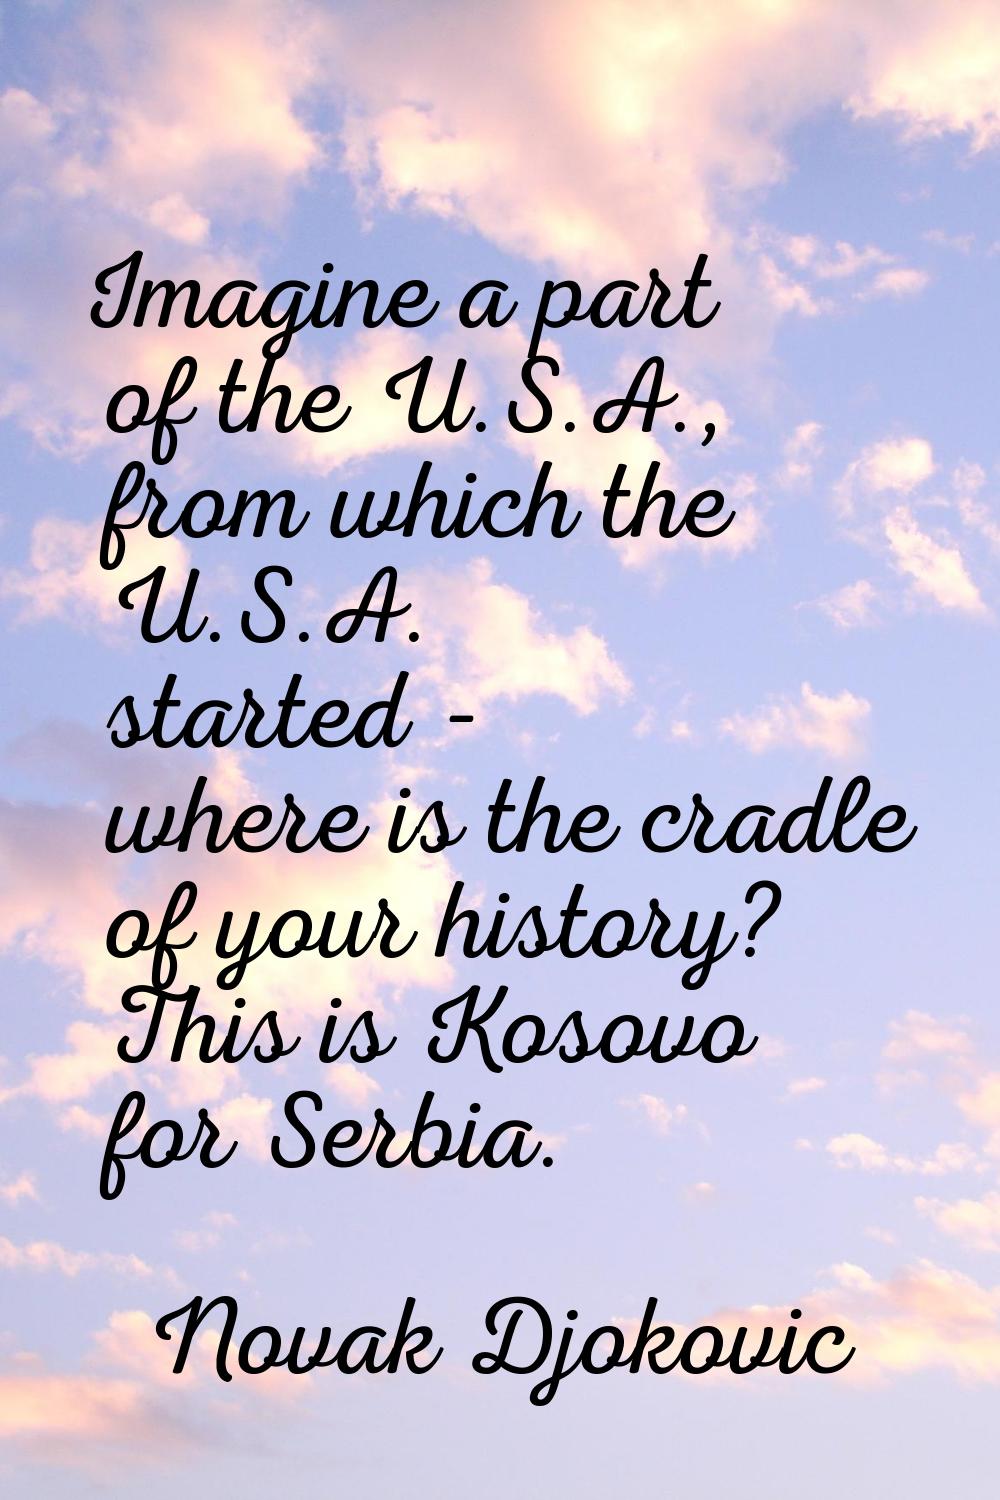 Imagine a part of the U.S.A., from which the U.S.A. started - where is the cradle of your history? 